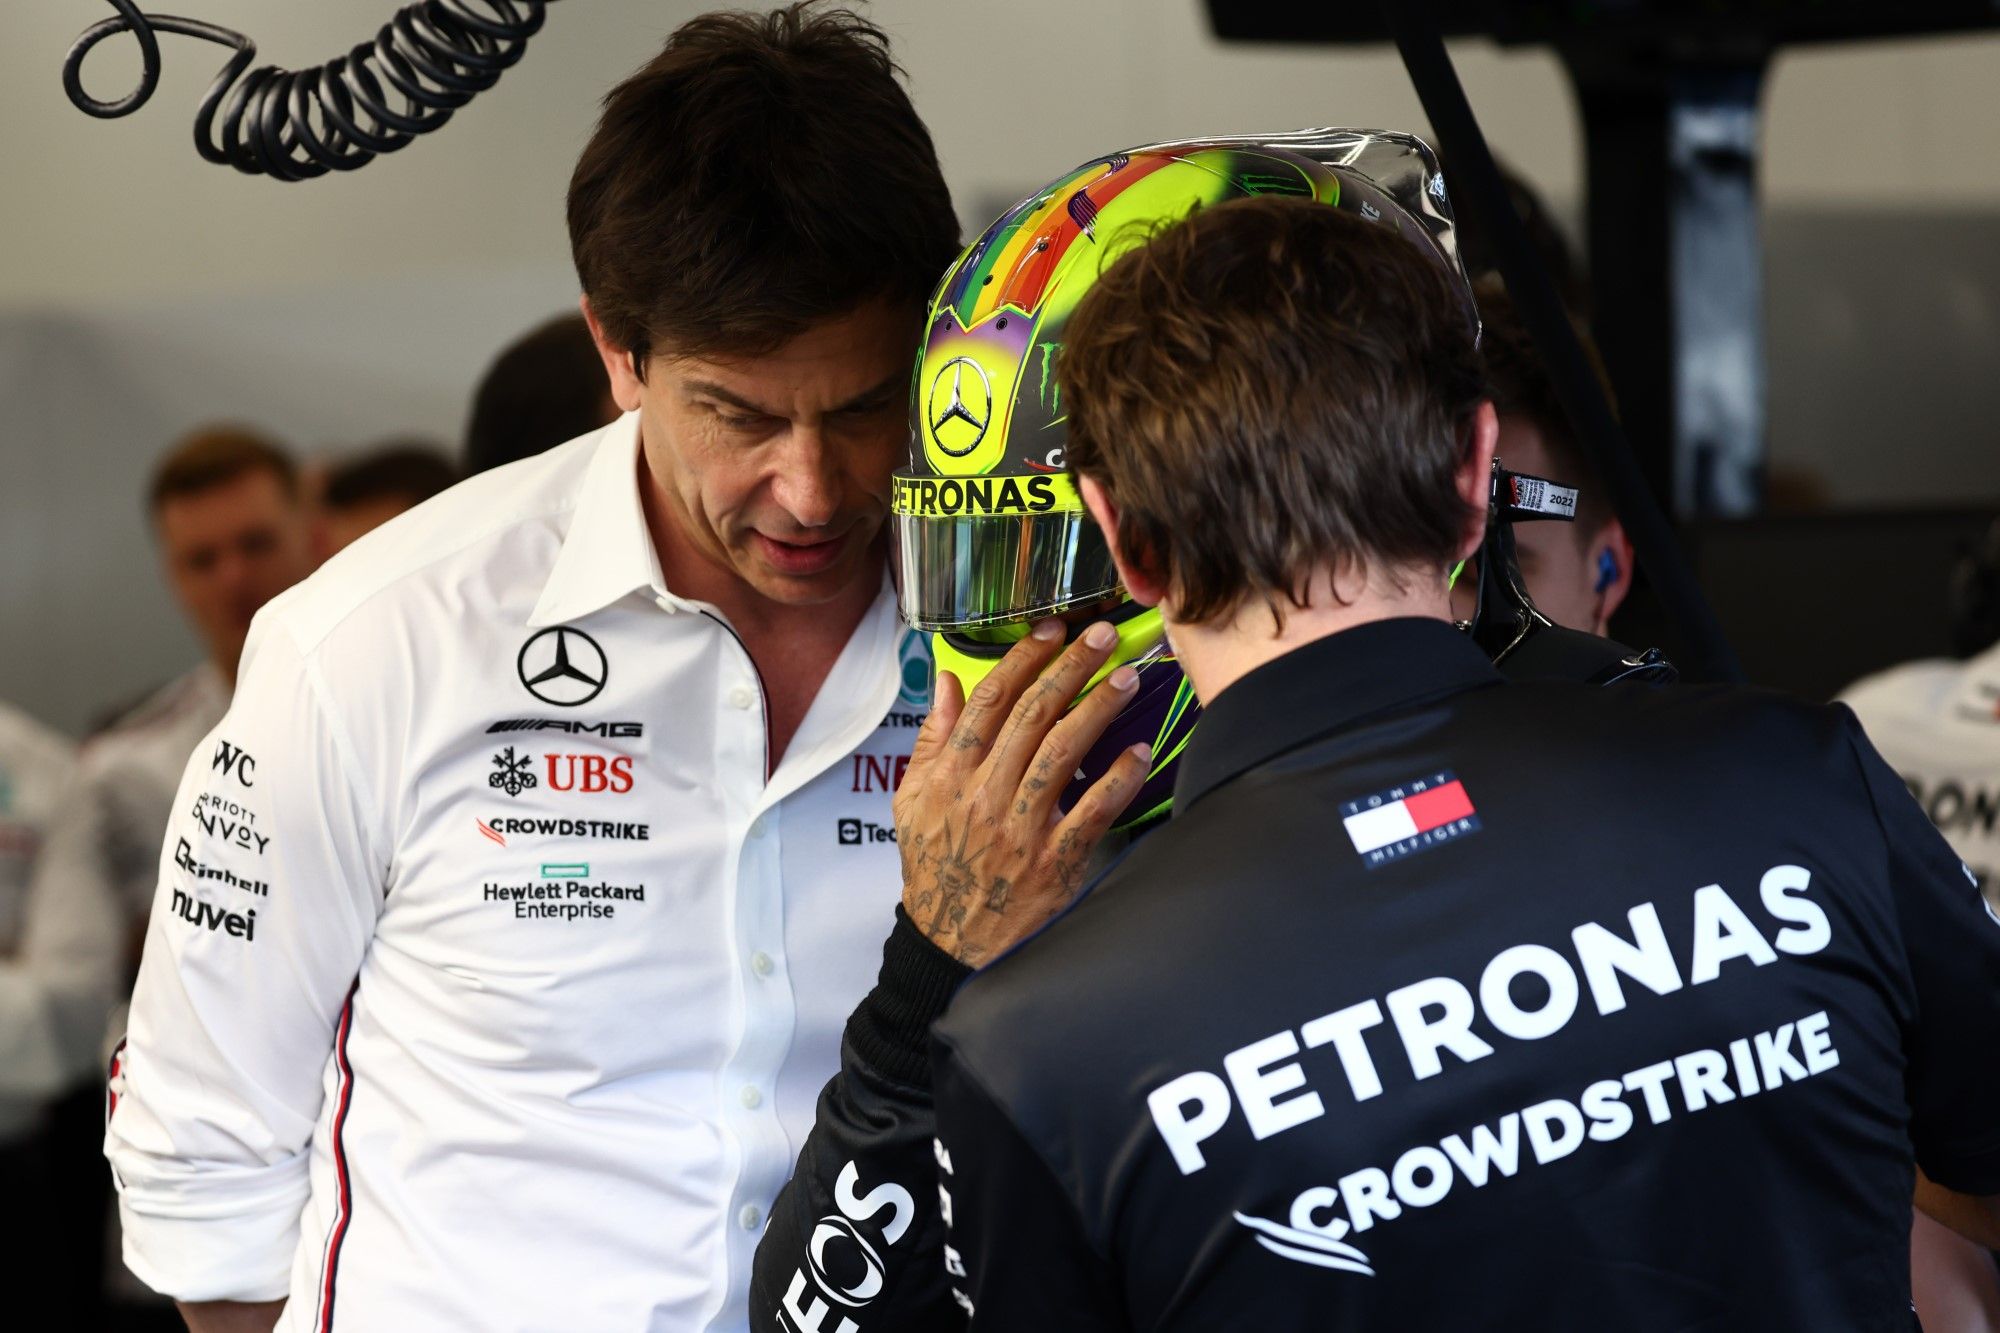 Toto Wolff and Lewis Hamilton, Mercedes, F1